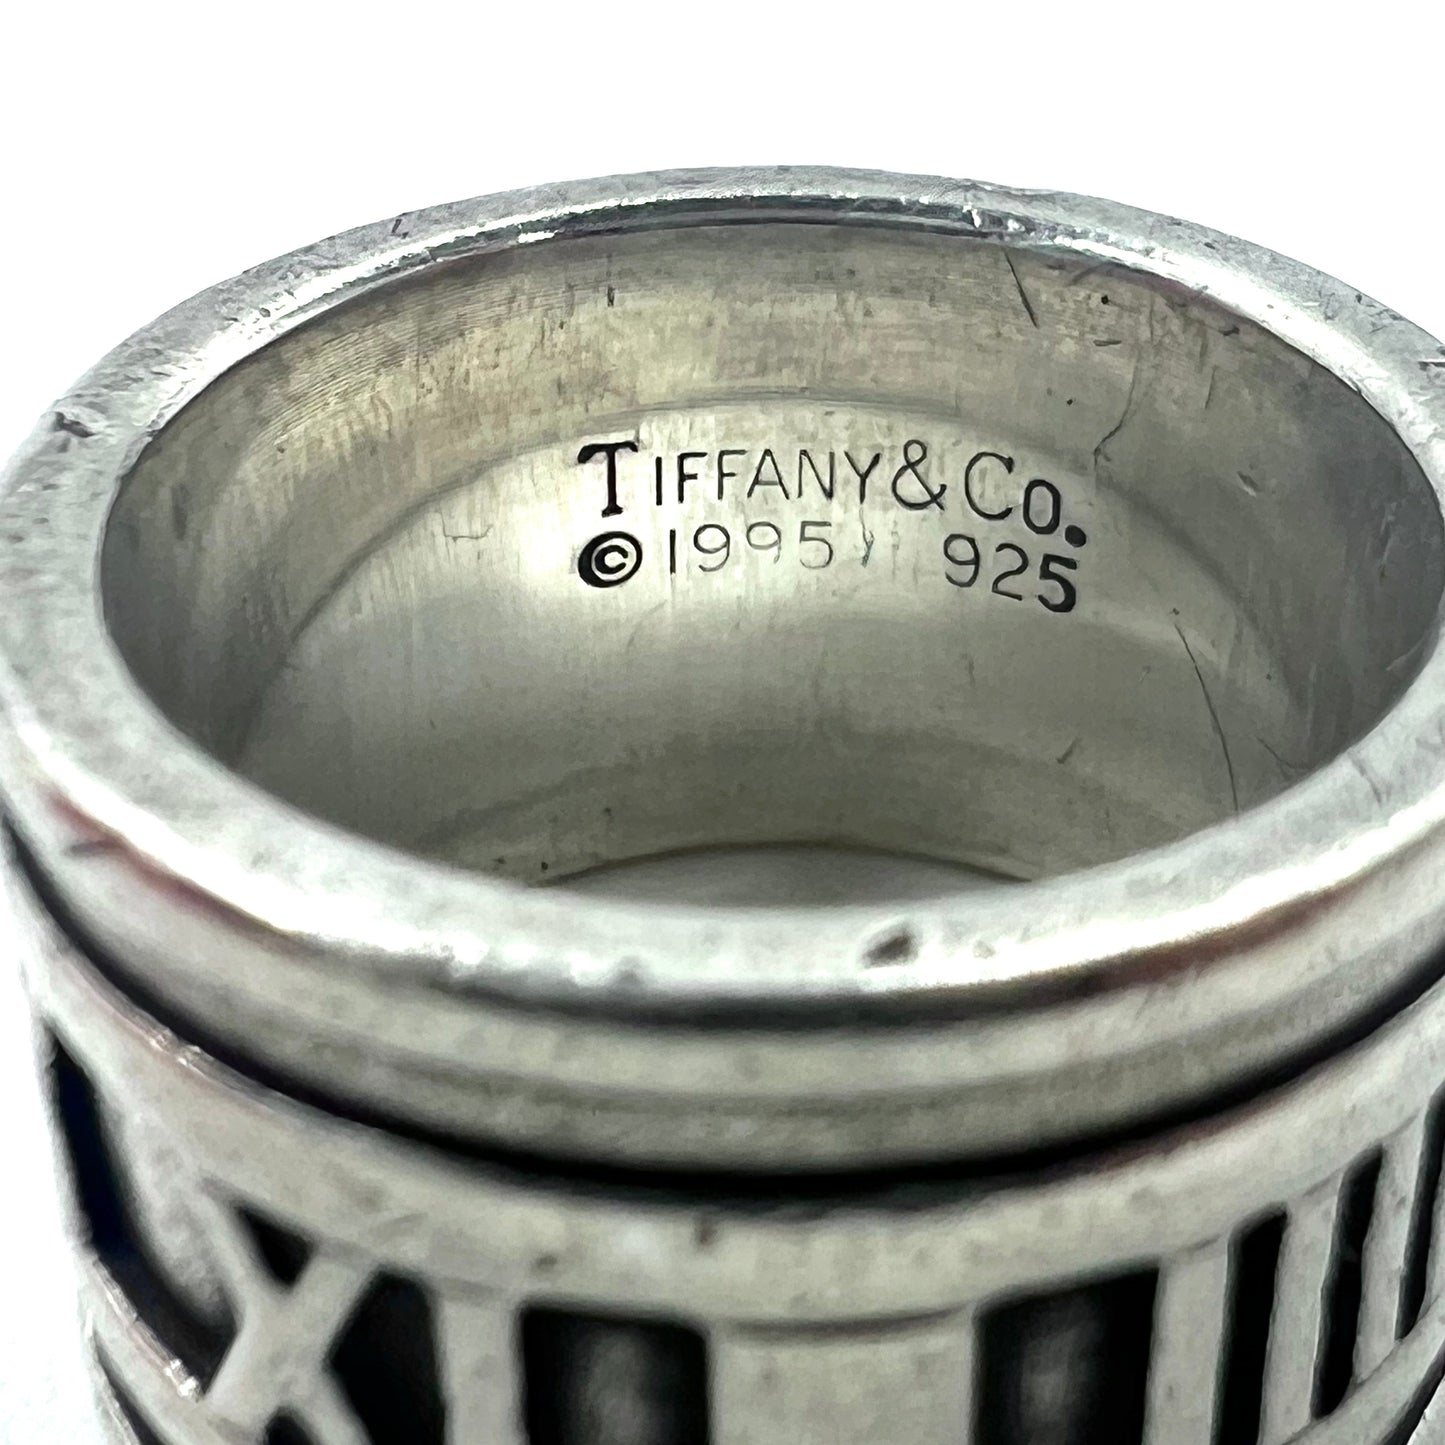 TIFFANY & CO. Atlas wide ring ring No. 9 Silver Silver 925 Pinky